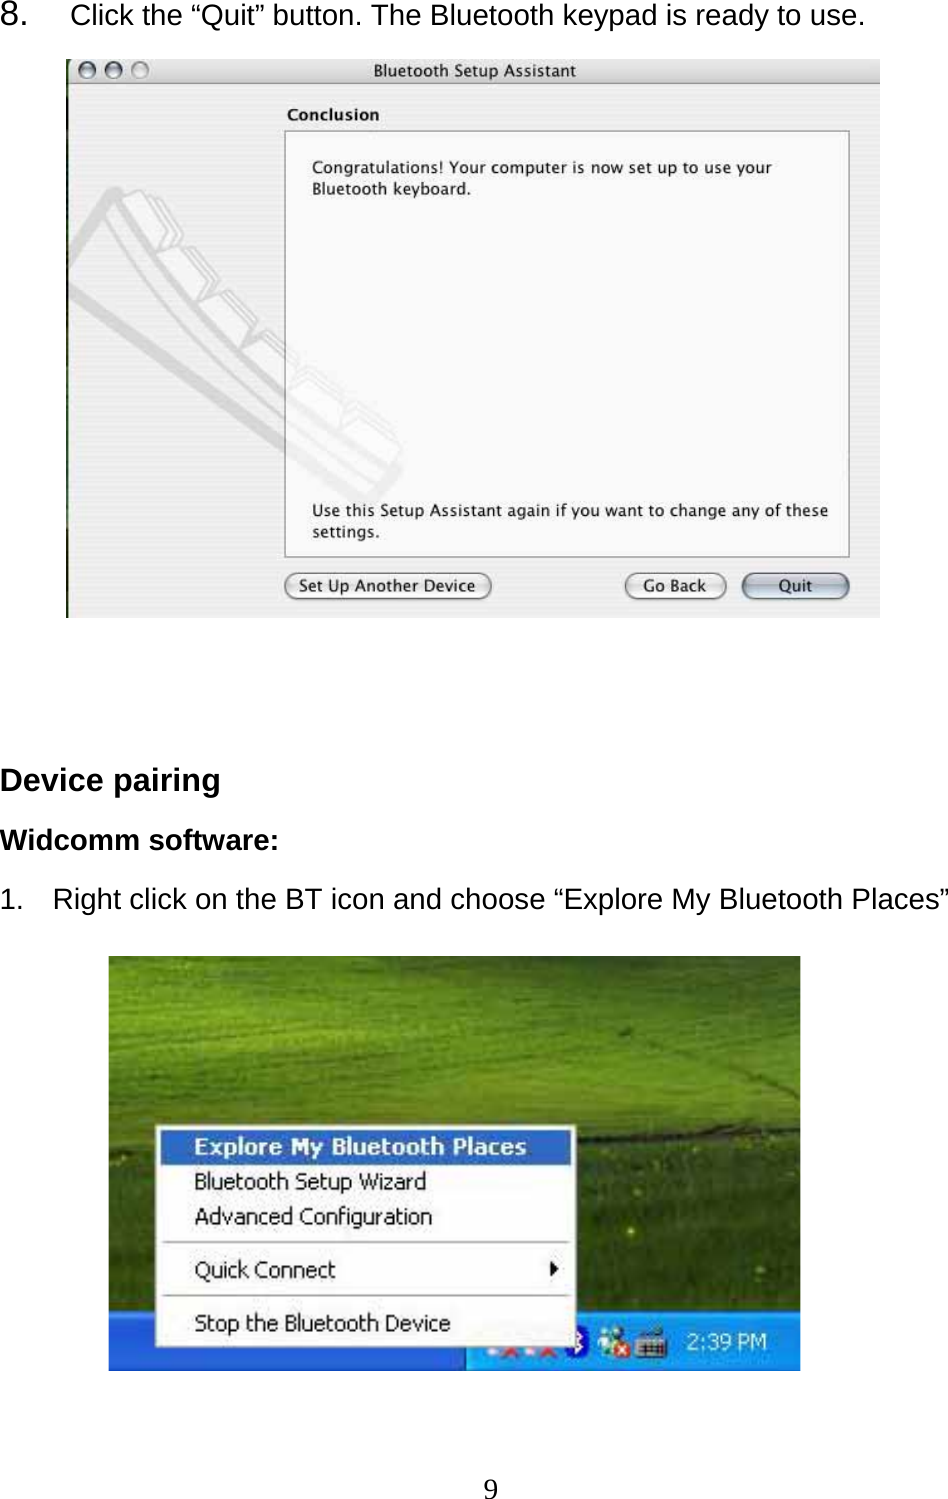 9 8.  Click the “Quit” button. The Bluetooth keypad is ready to use.             Device pairing Widcomm software: 1.  Right click on the BT icon and choose “Explore My Bluetooth Places”          